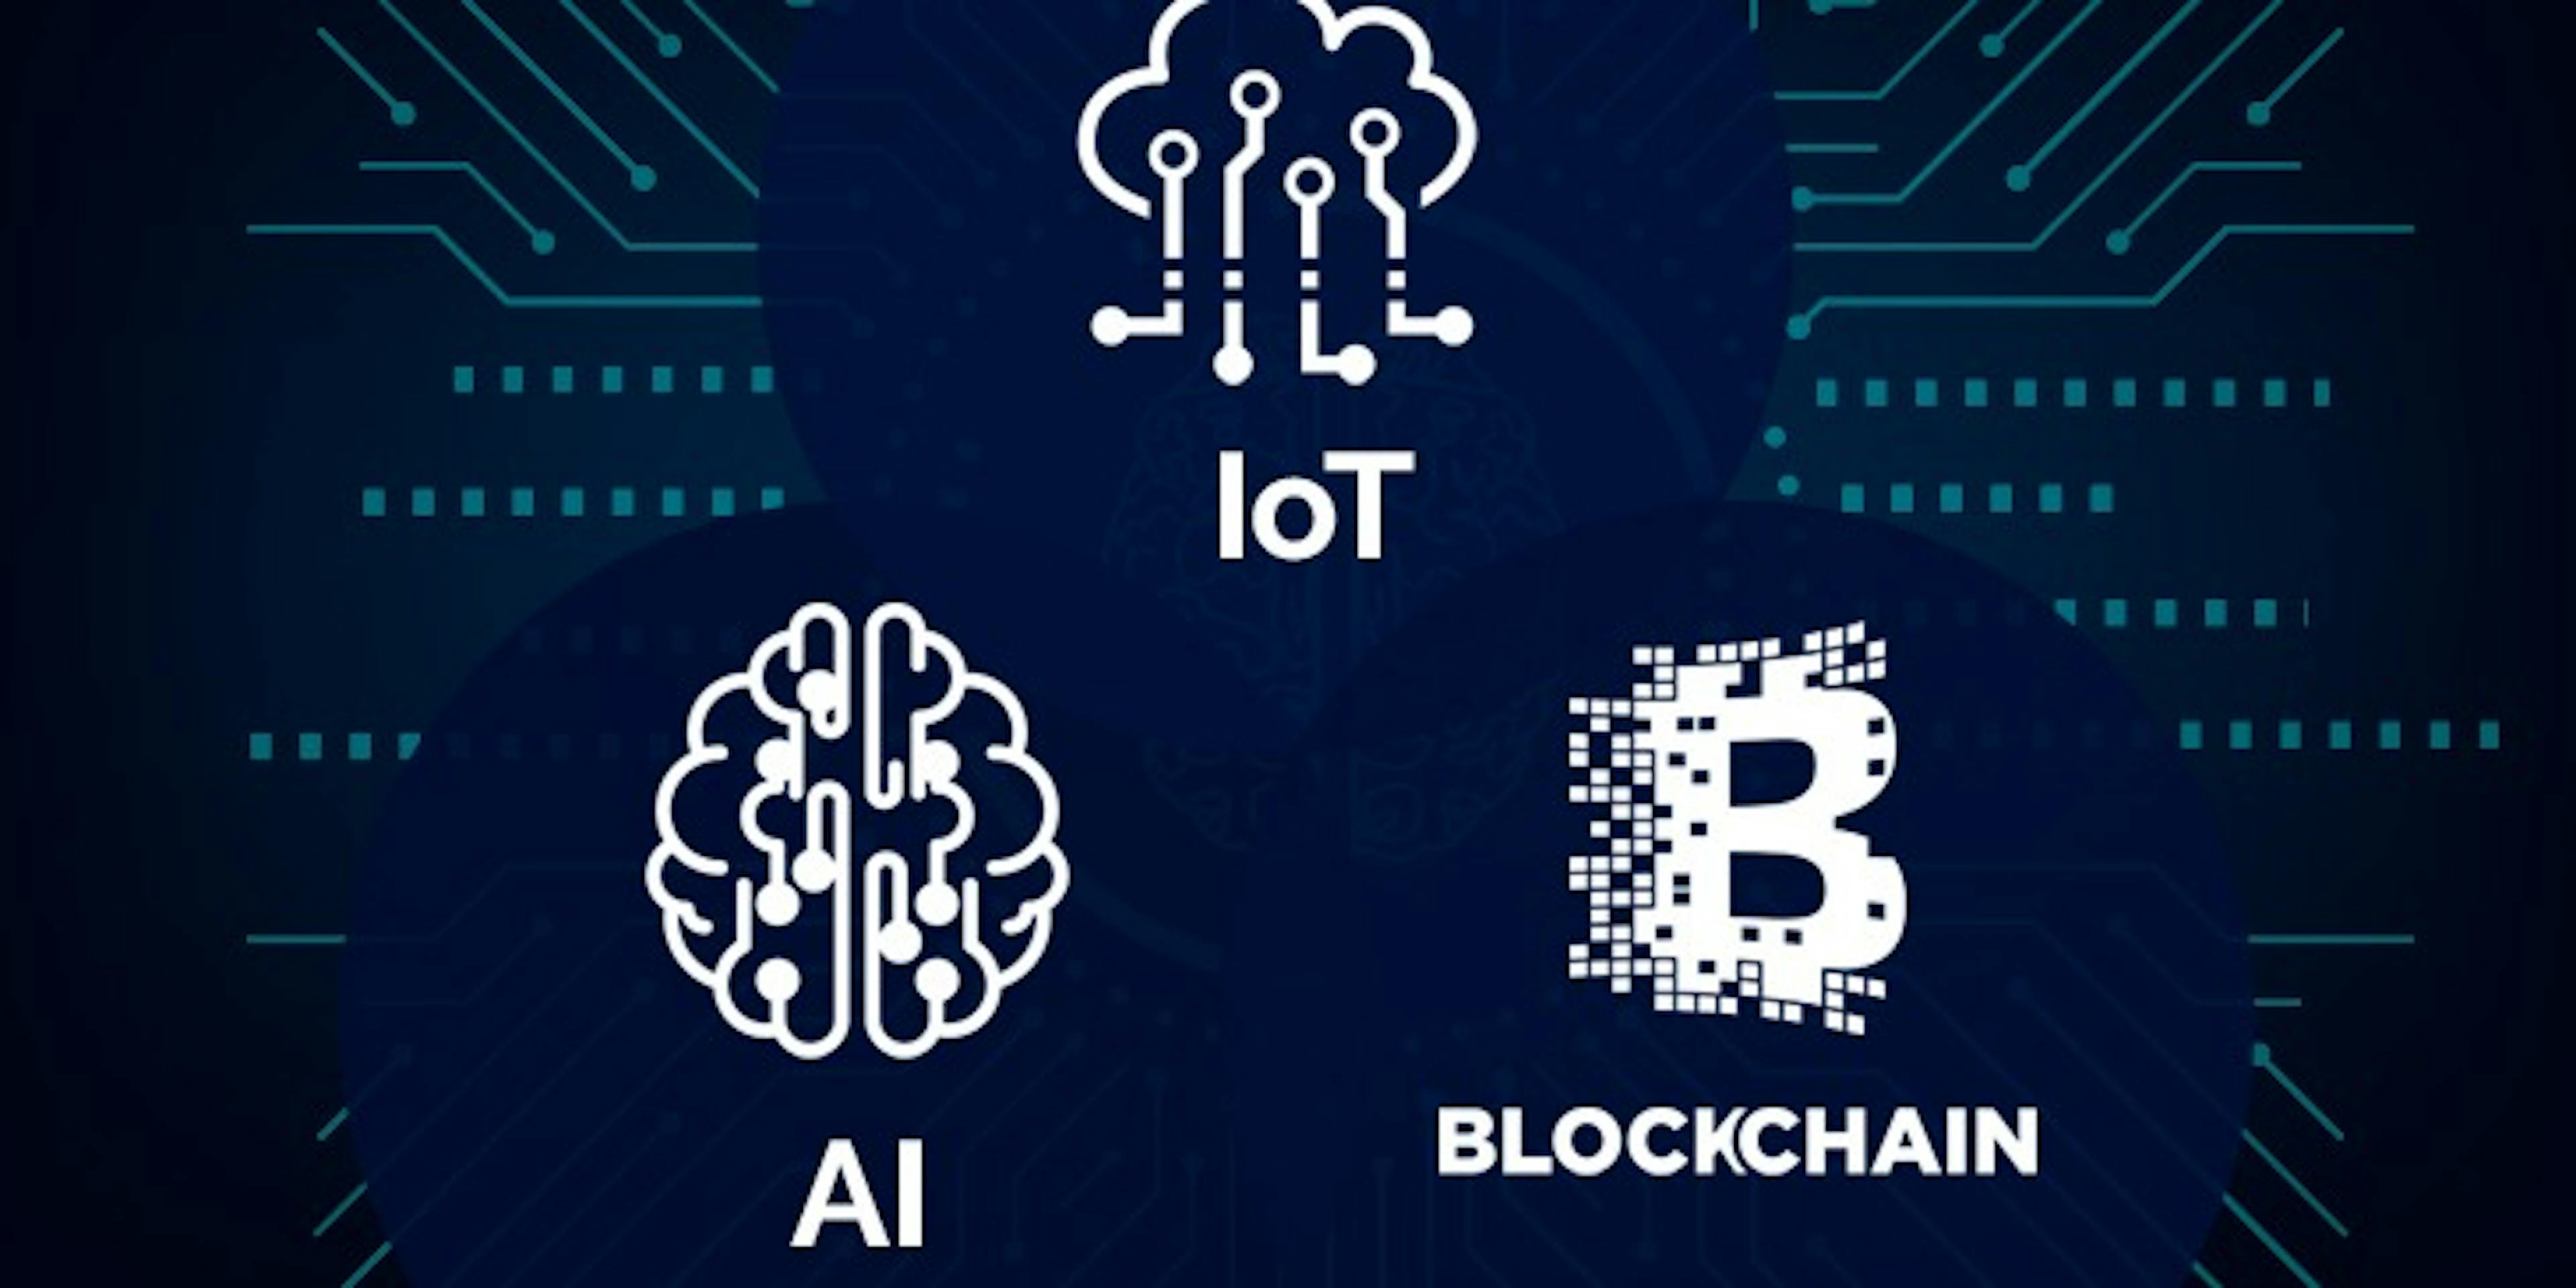 /2019-an-year-of-coming-together-blockchain-iot-and-ai-yb2de3ycw feature image